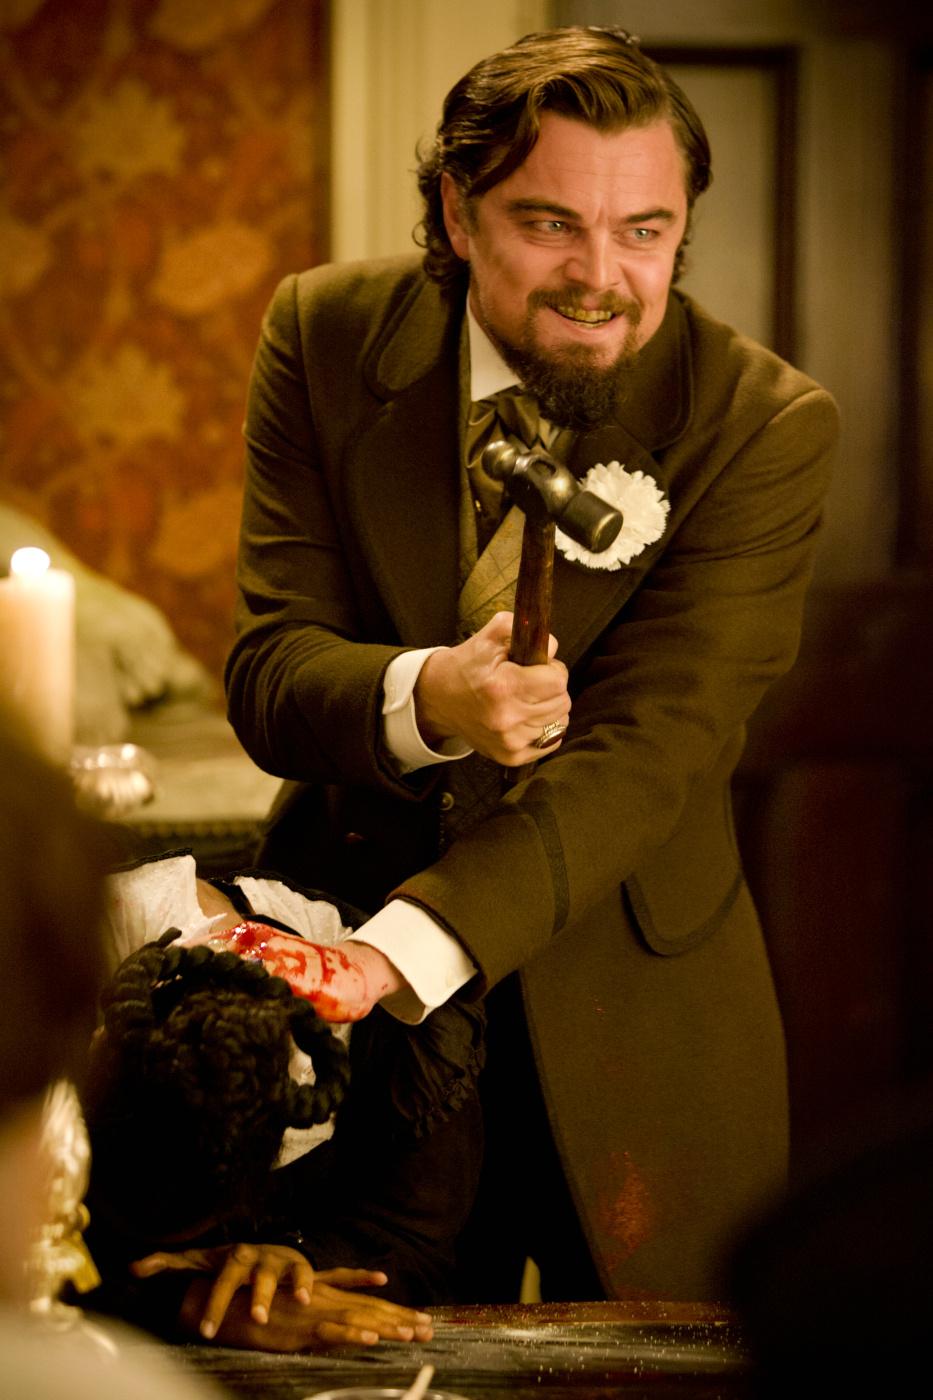 http://www.vibe.com/sites/vibe.com/files/photo_gallery_images/Django-Unchained-29.jpg